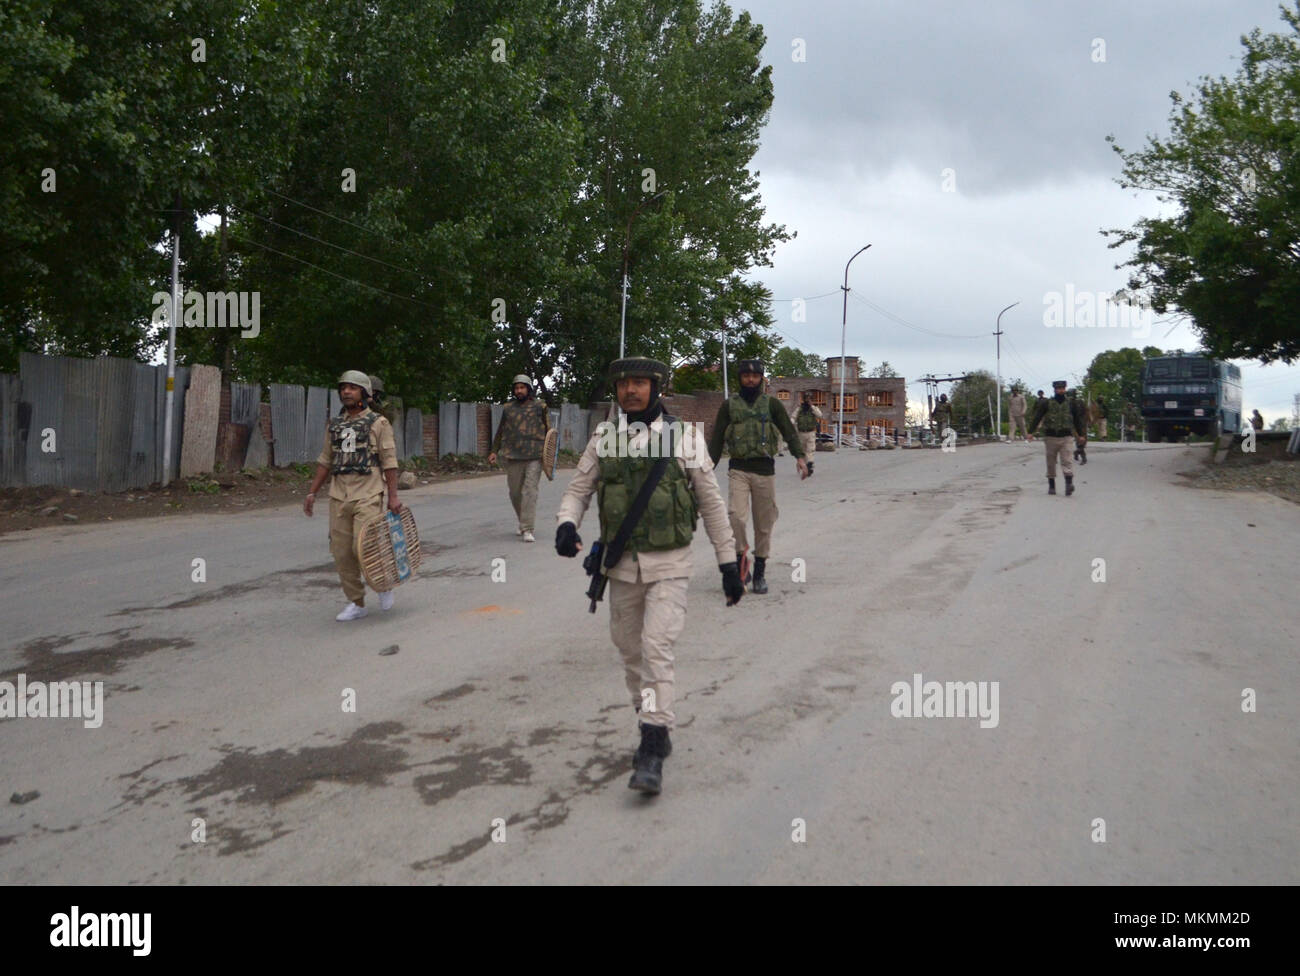 Srinagar, India. 07th May, 2018. Forces arrive as the youth clash with Indian government forces in Srinagar, Indian Administered Kashmir on 07 may 2015. Hundreds of youth took to the streets and clashes with Government forces against the Killings of 5 Civilians and 5 rebels during a gunfight in Shopian district of the Valley on 06 May 2018. Meanwhile curfew had been put in place to thwart the protests. Credit: Muzamil Mattoo/Pacific Press/Alamy Live News Stock Photo